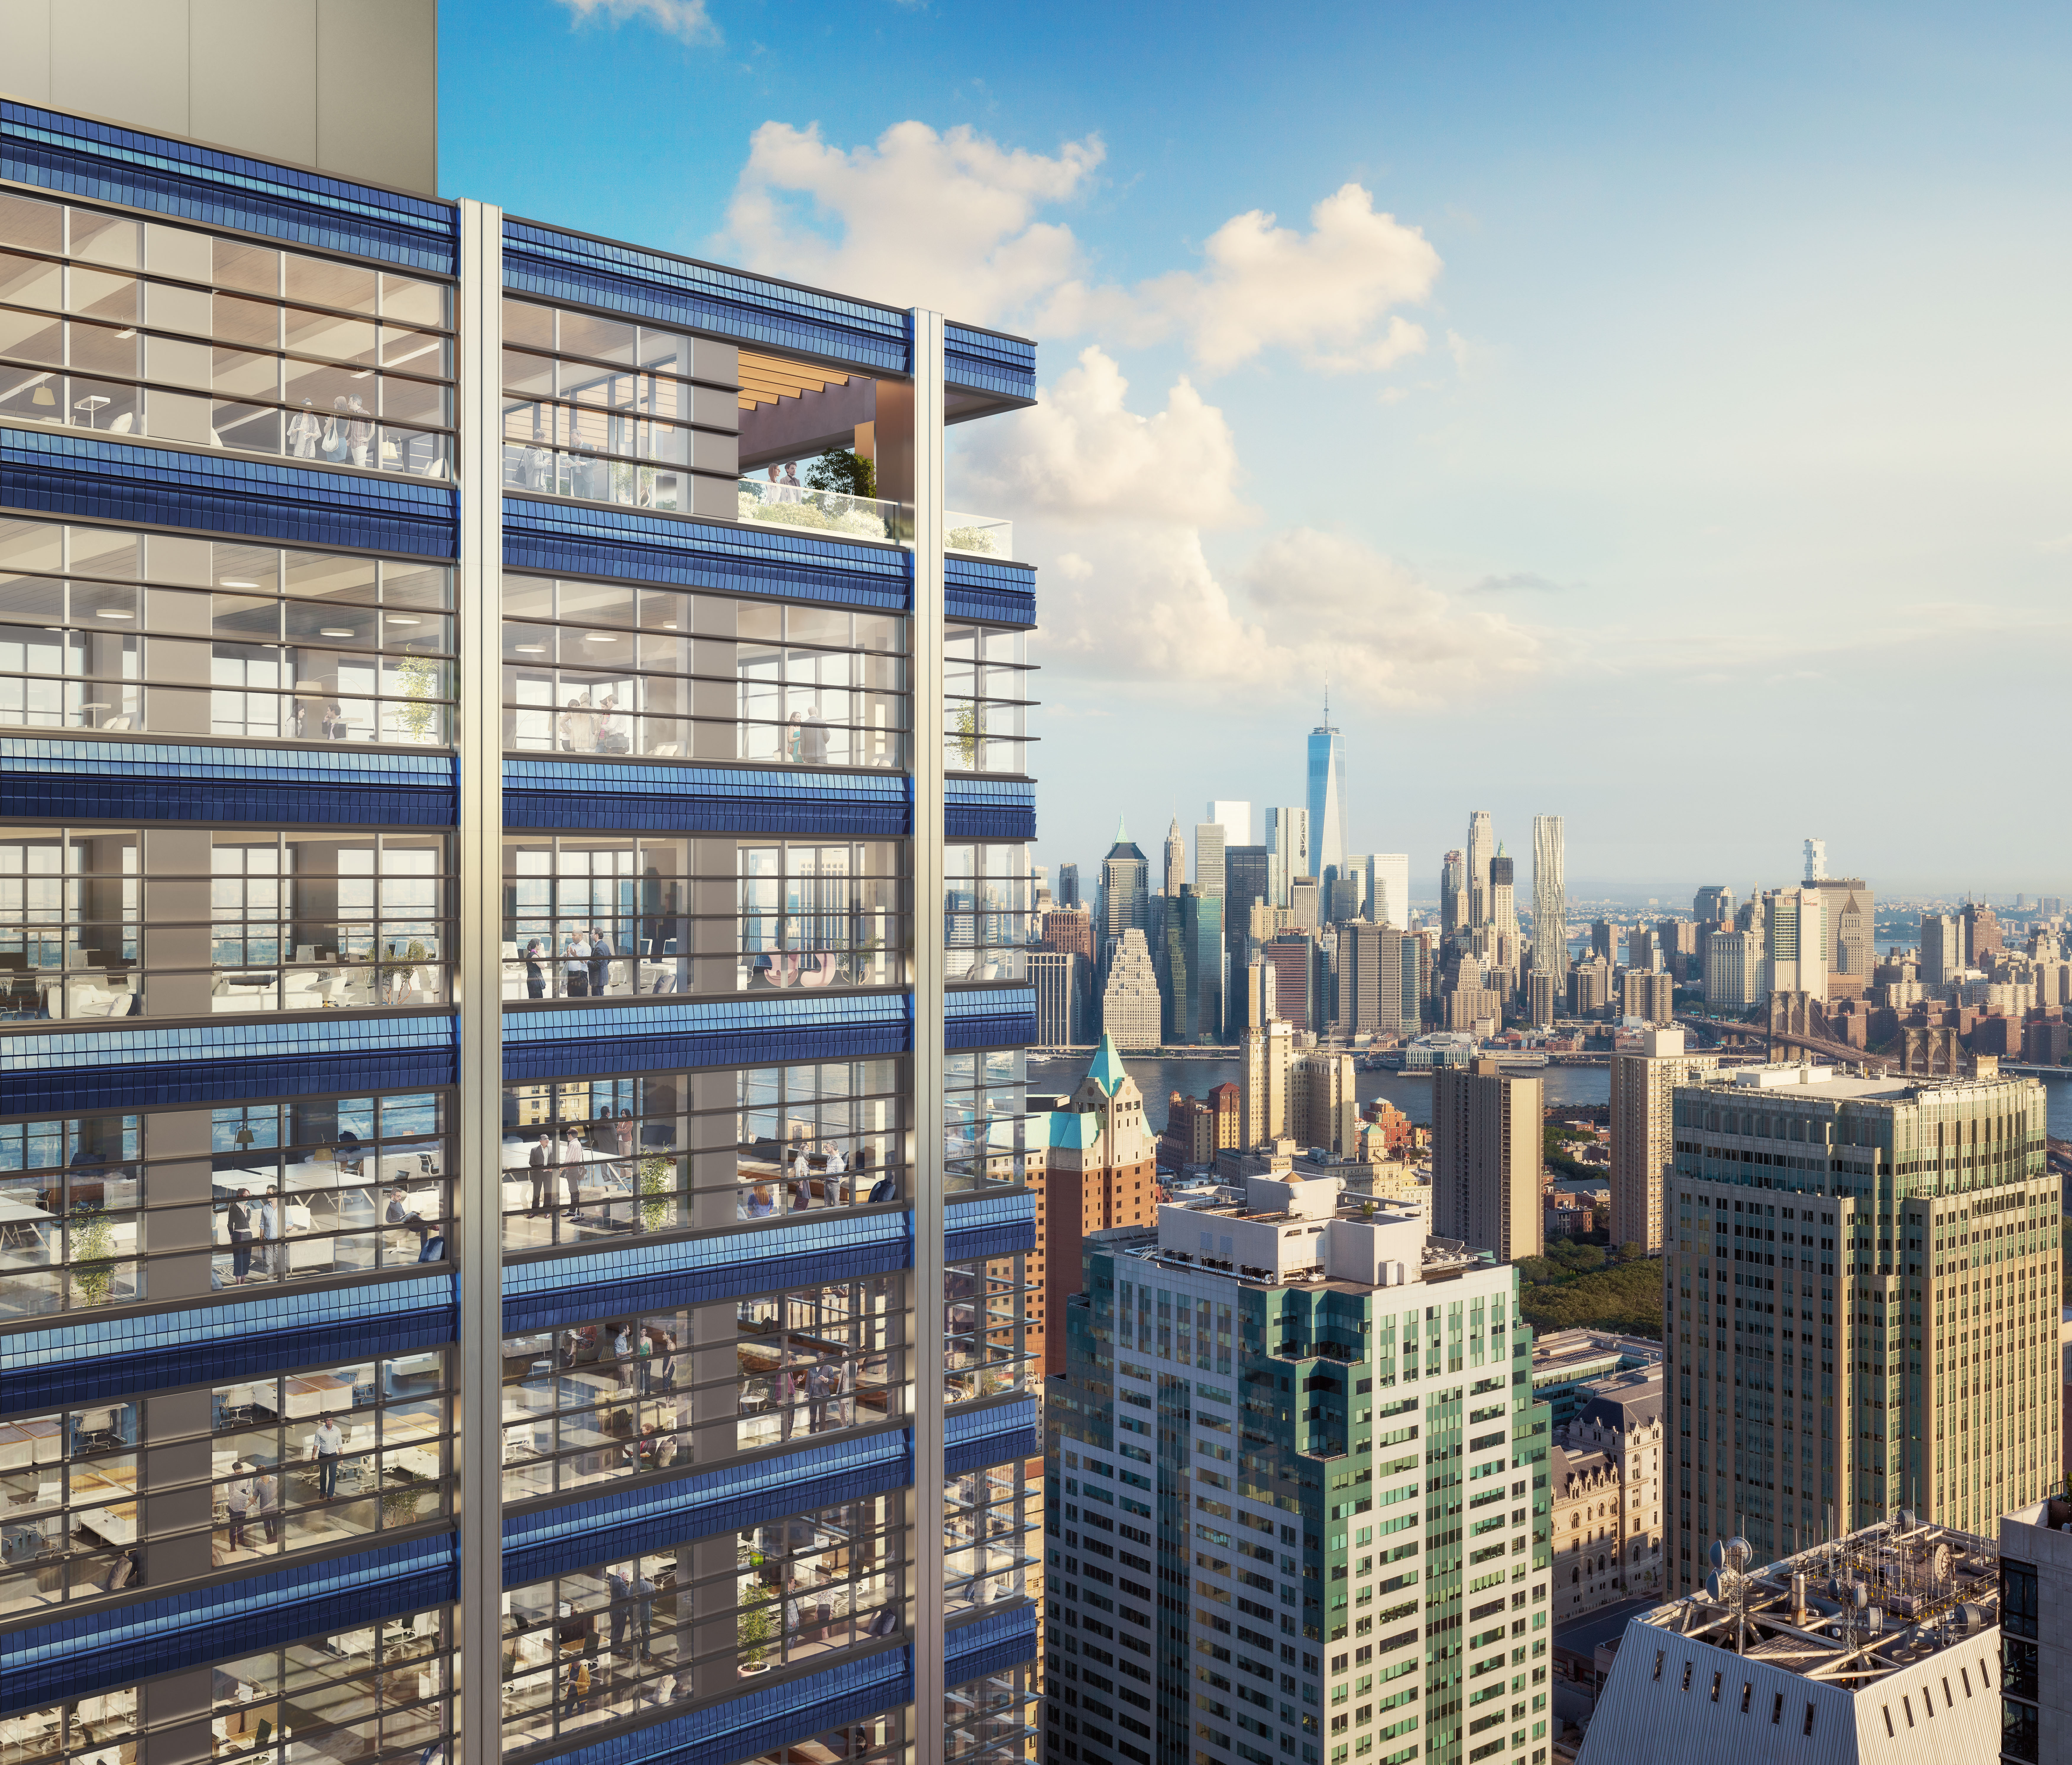 FXFOWLE inks lease at Brooklyn office tower it’s designing